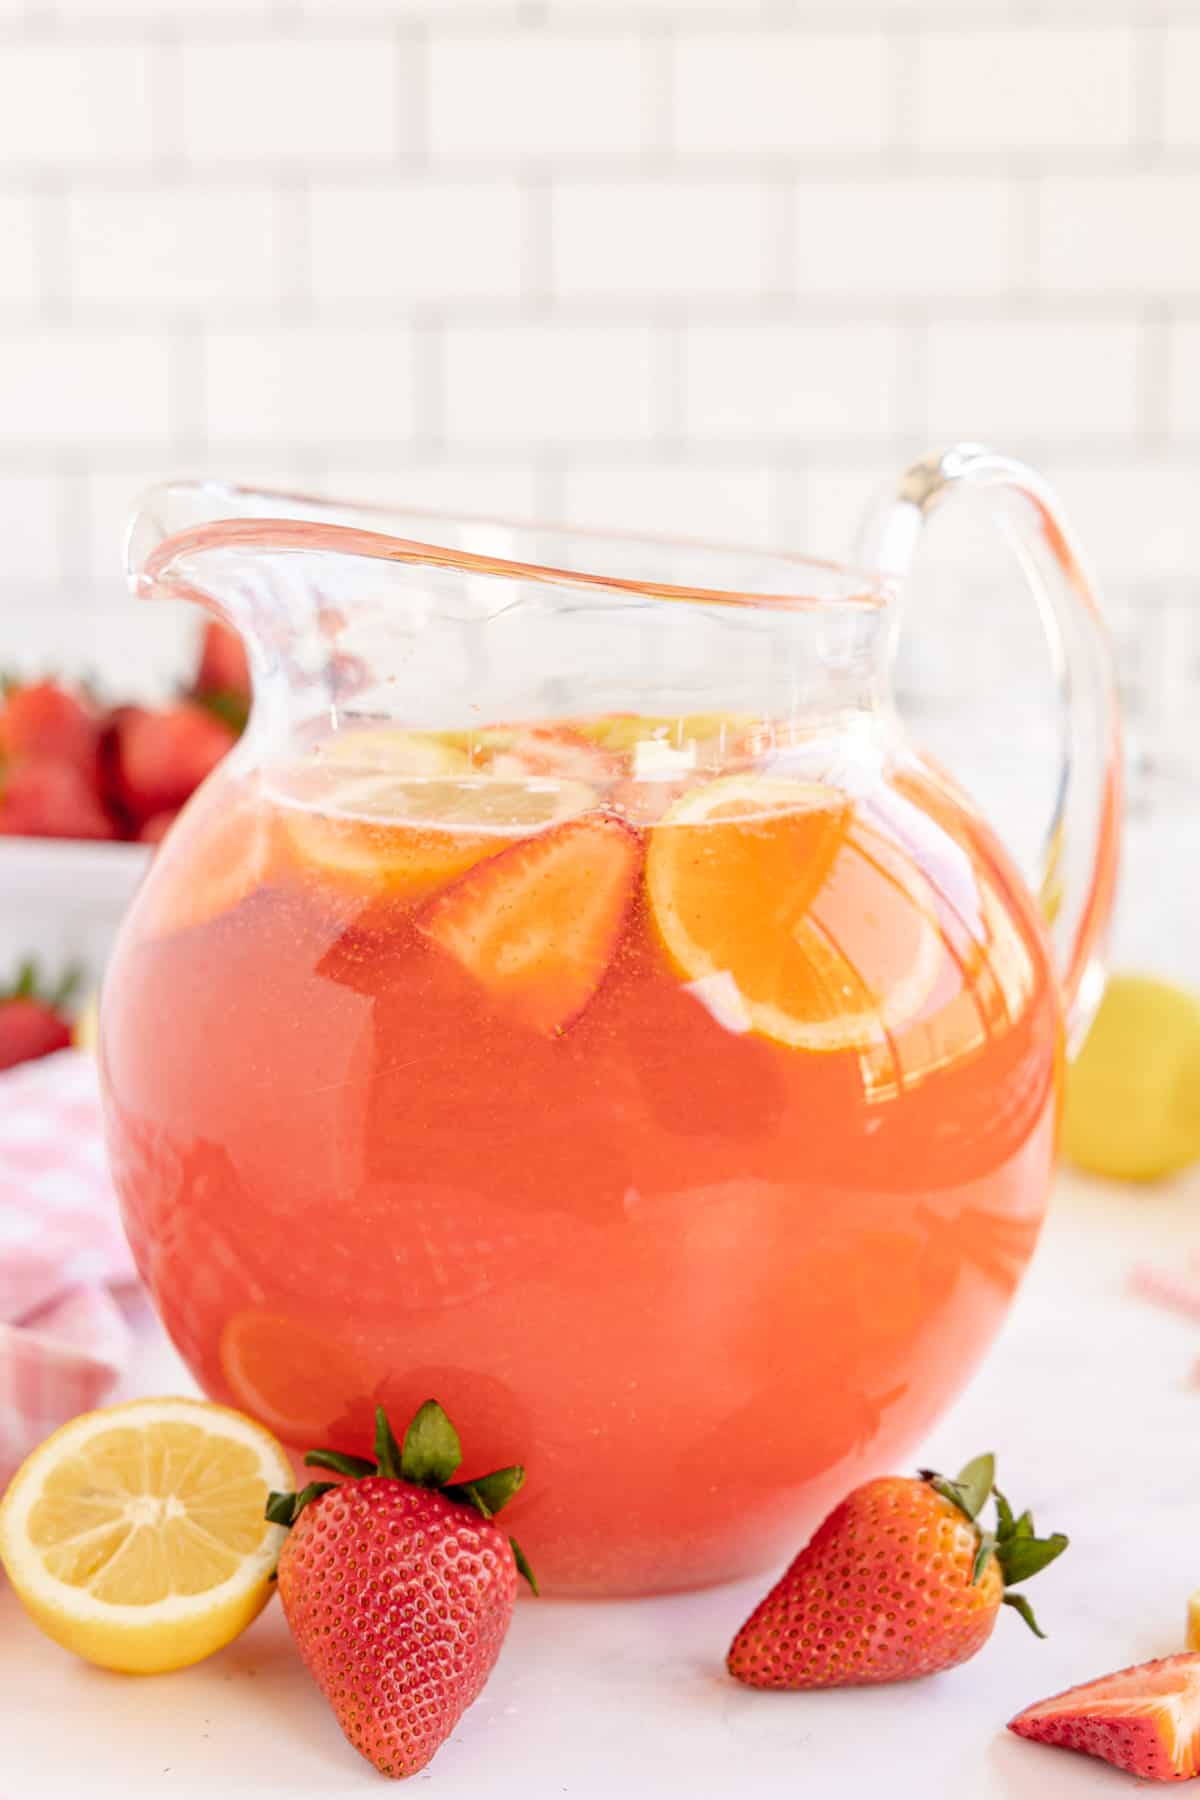 A pitcher of homemade strawberry lemonade with lemon slices and strawberries.